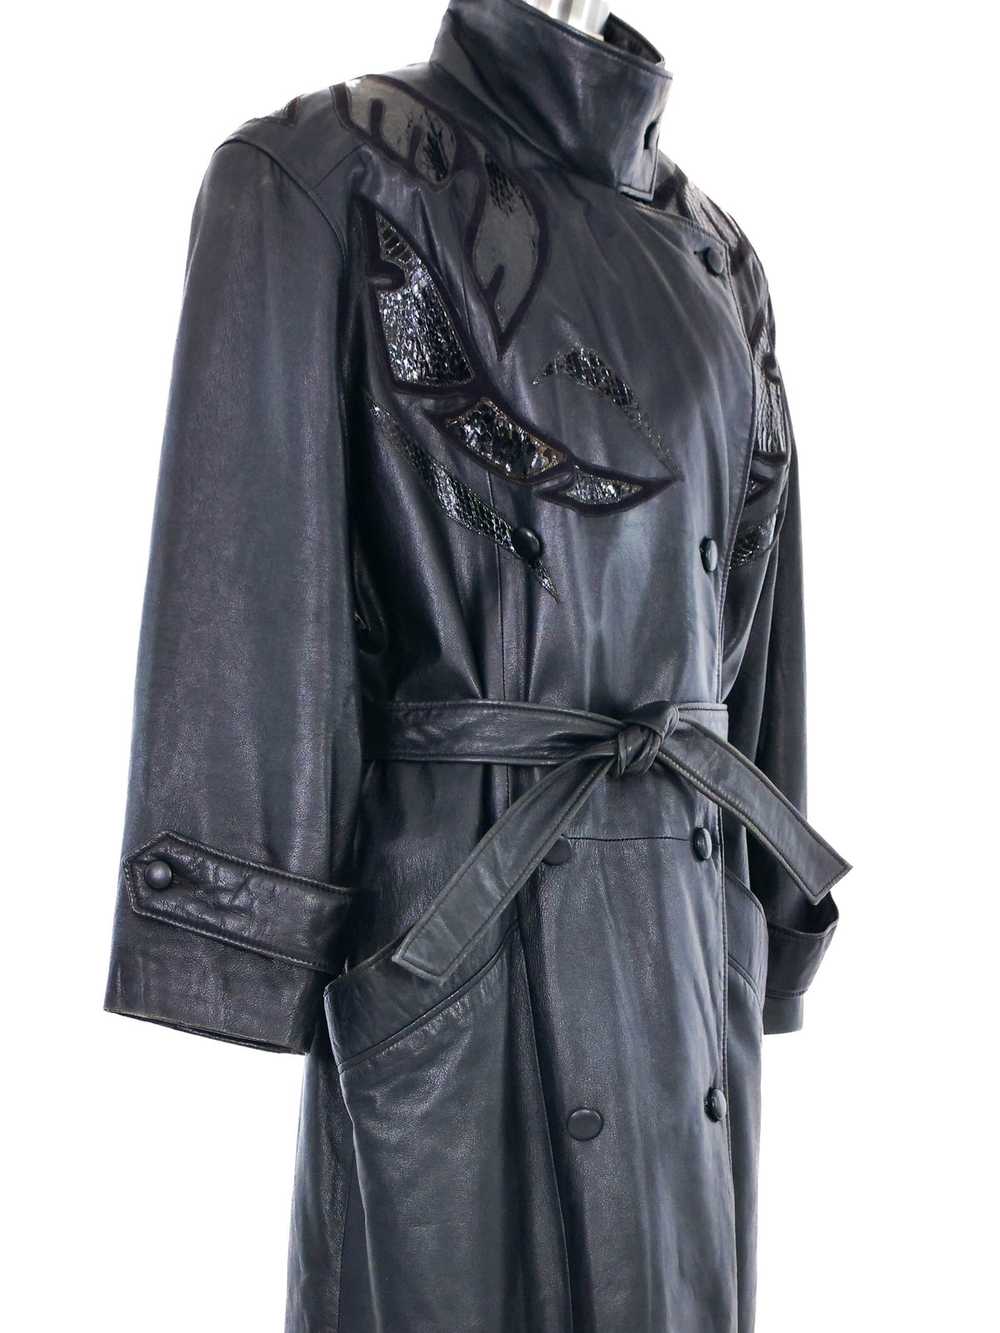 1980s Leather Applique Trench Coat - image 2